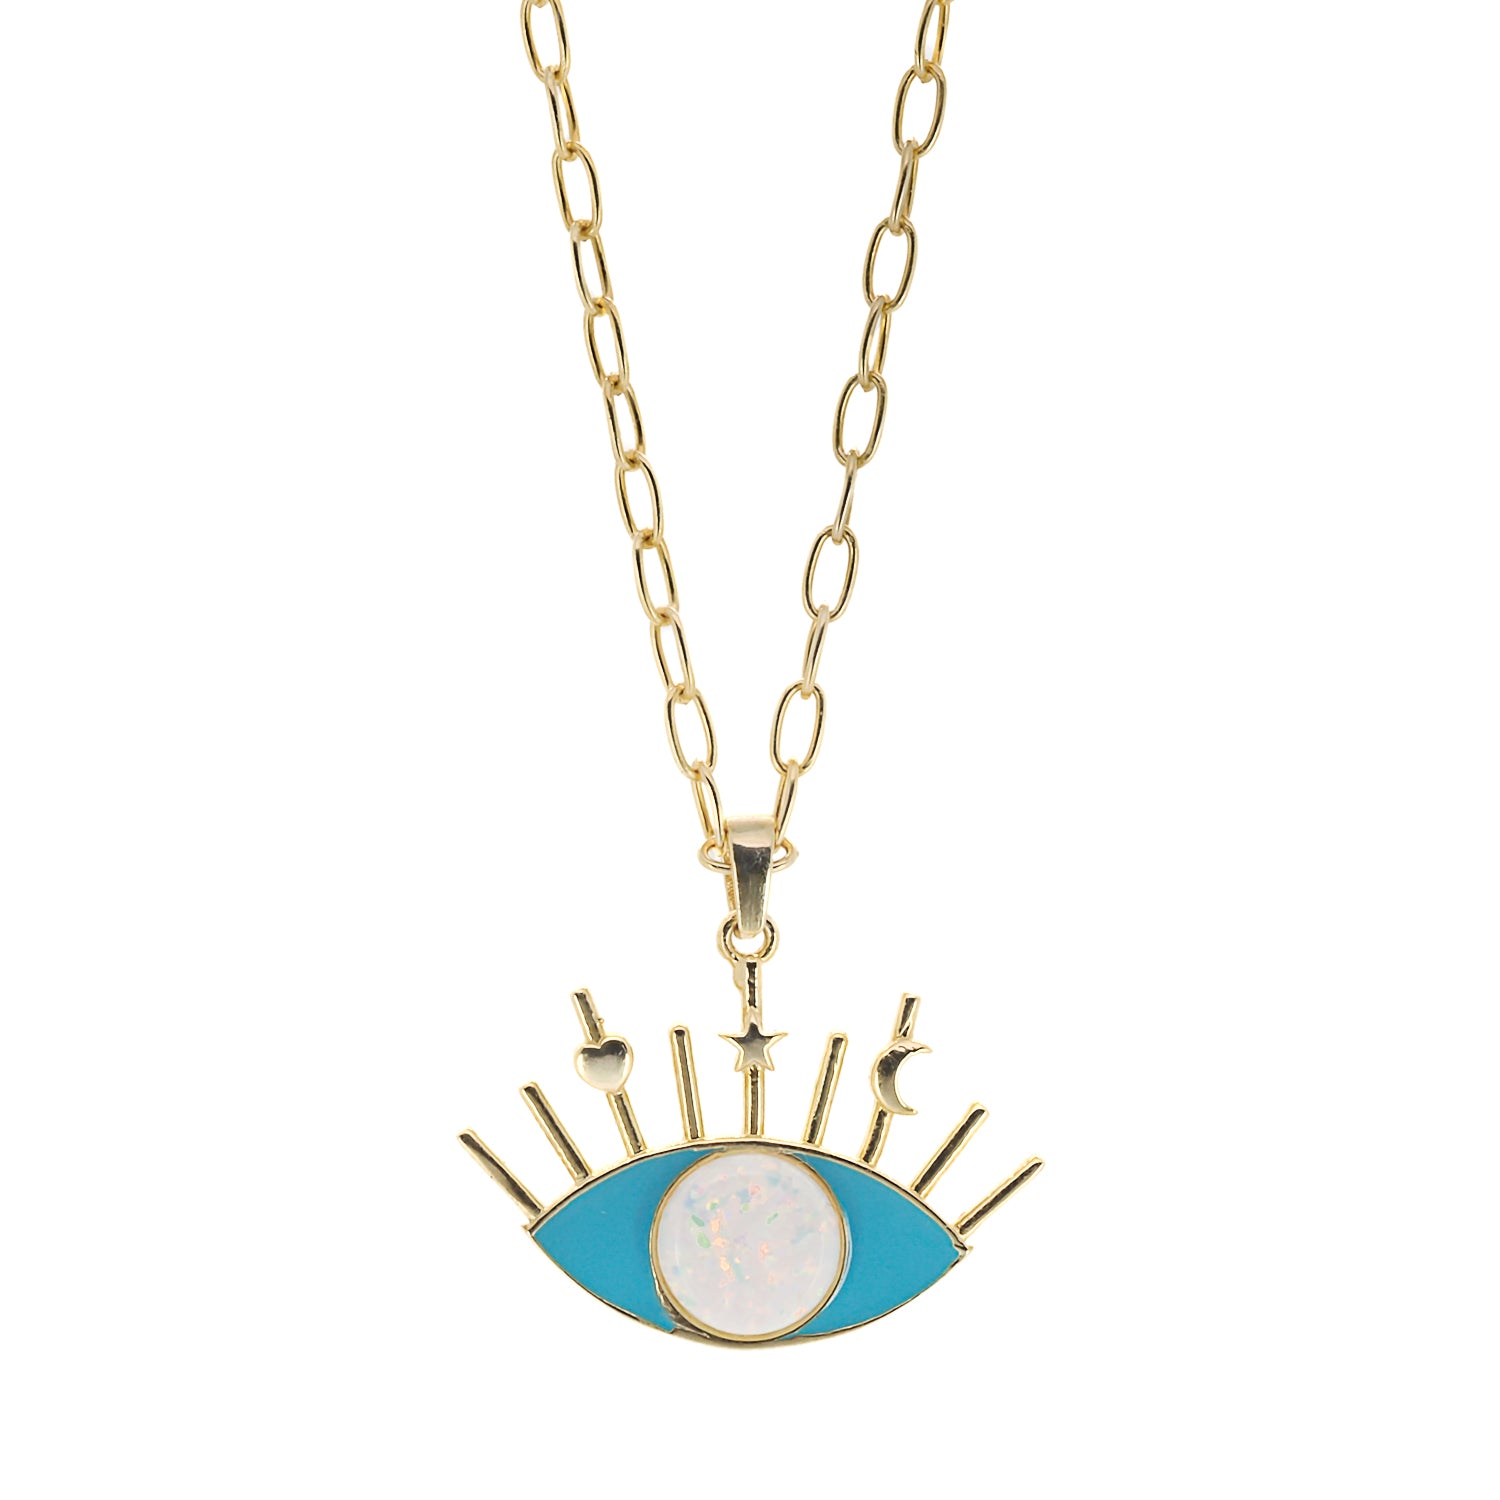 The Opal Turquoise Evil Eye Necklace, a stunning blend of elegance and spiritual symbolism.